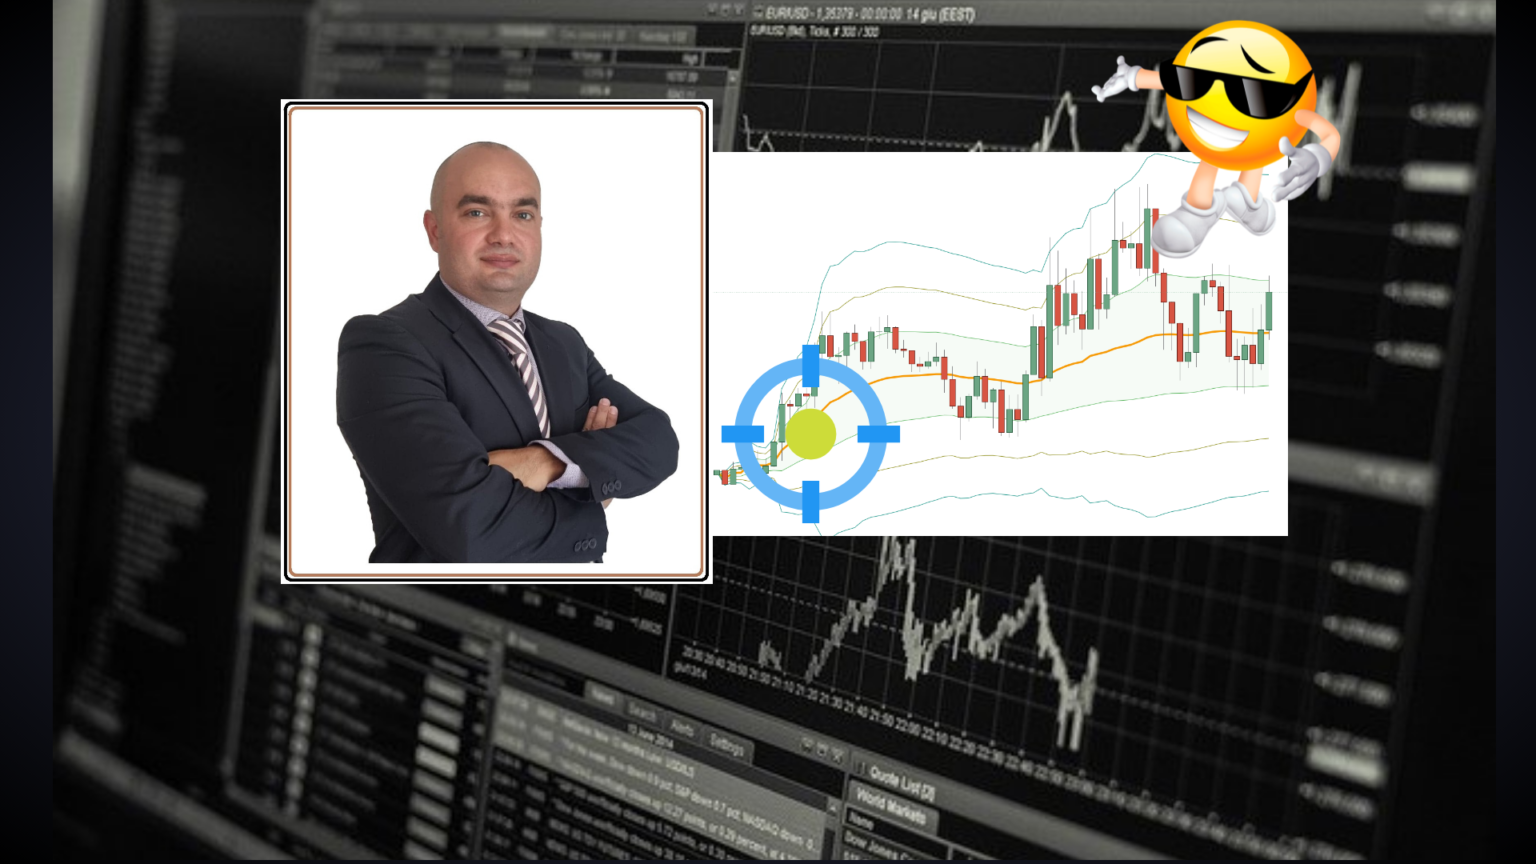 The VWAP (Volume Weighted Average Price) trading course on Udemy is designed to help traders make informed trading decisions based on market trends and volume data.